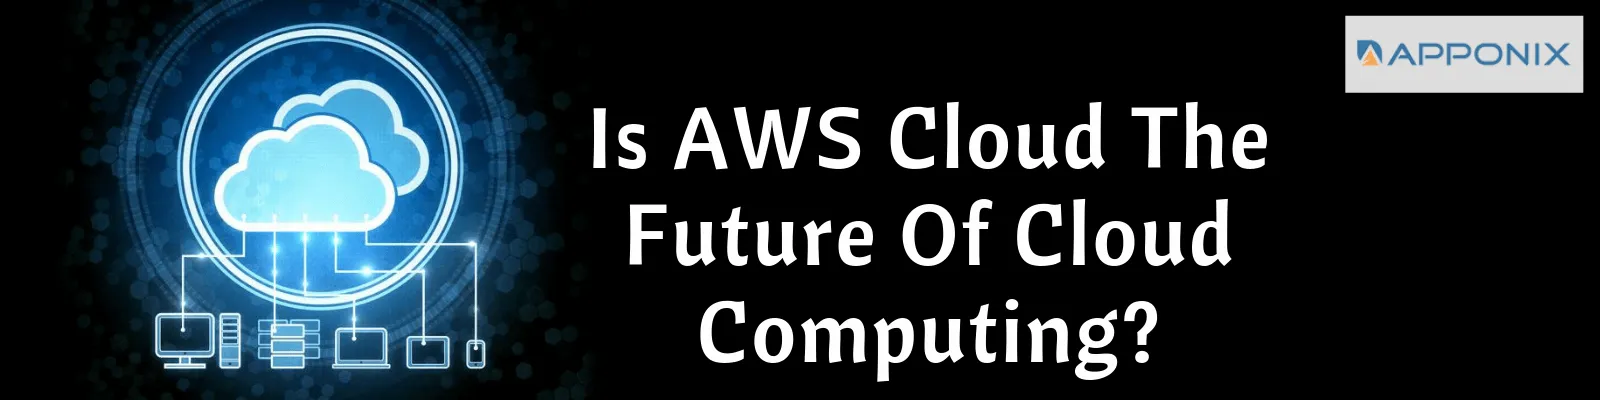 Is AWS Cloud The Future Of Cloud Computing?